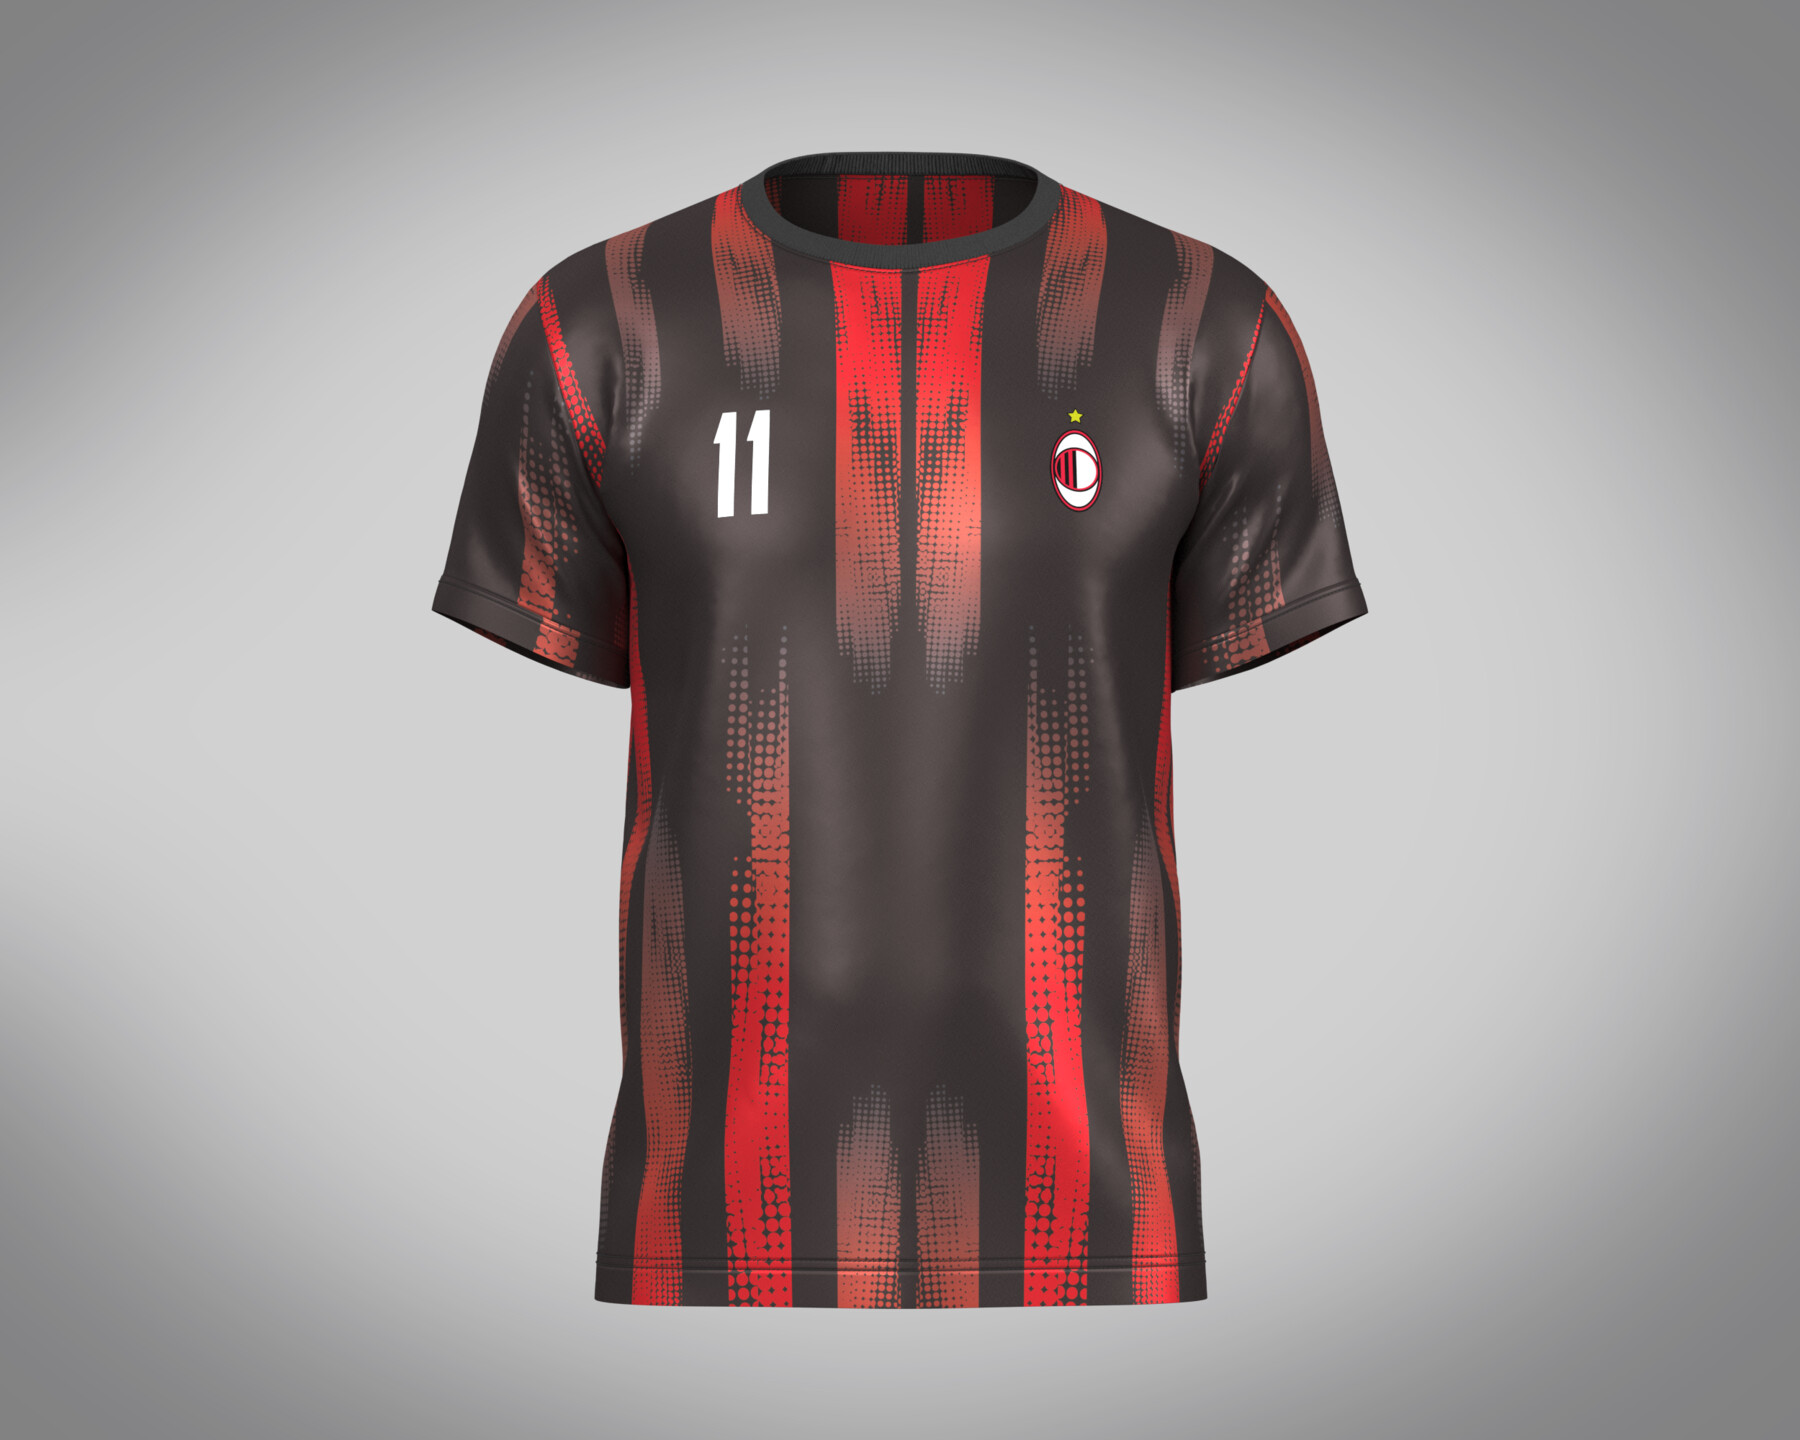 Football Jersey Design Black with red Sublimation